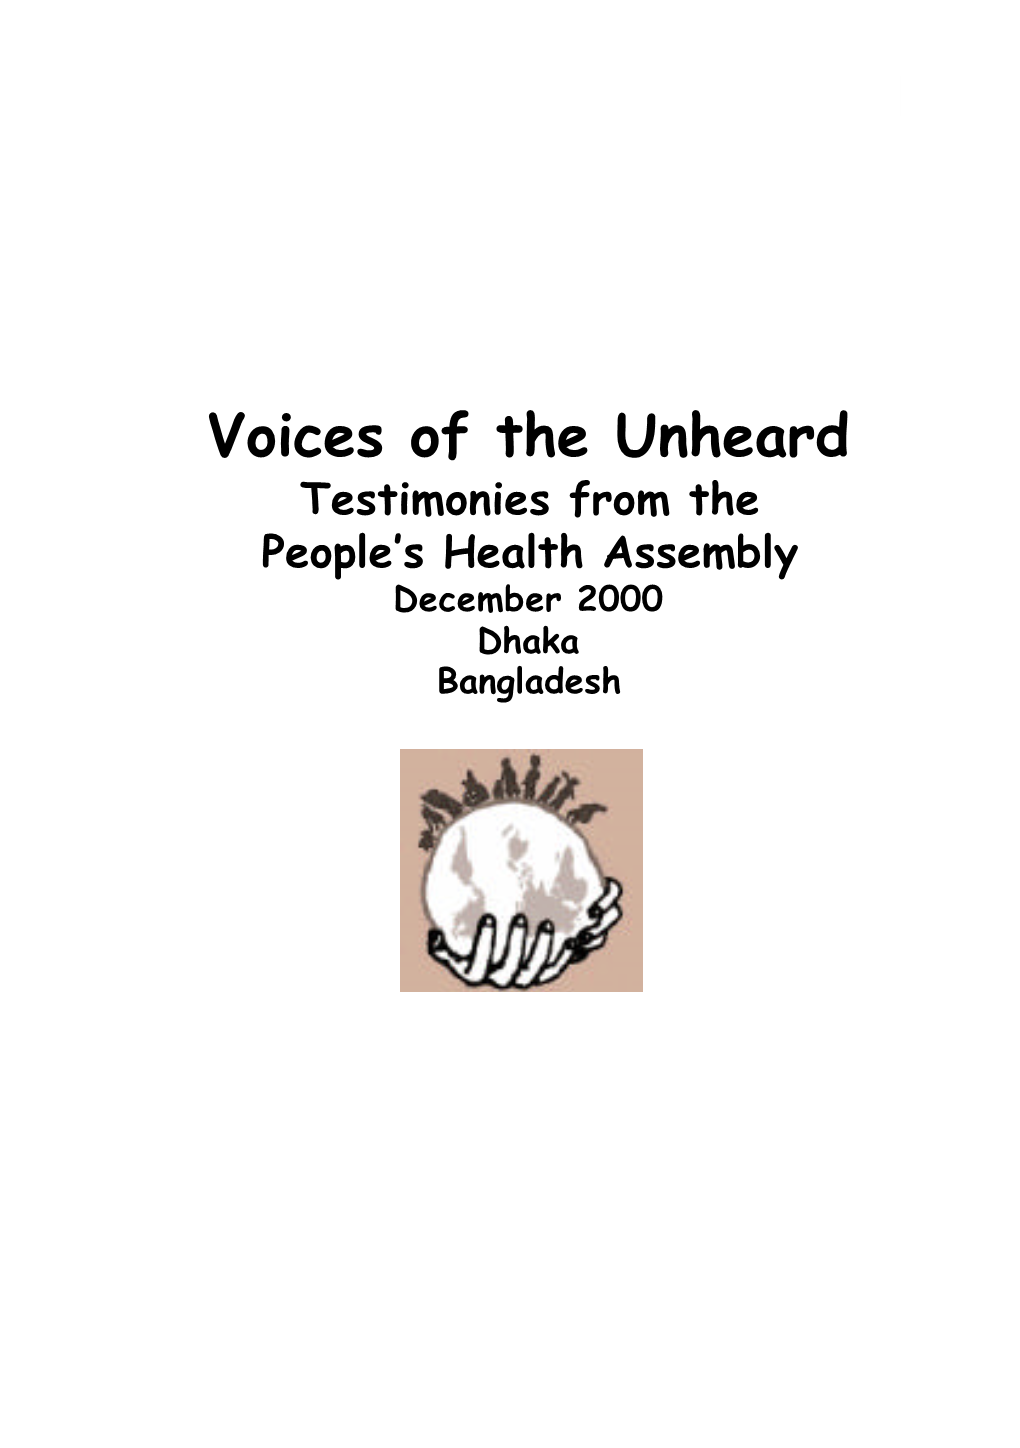 Voices of the Unheard Testimonies from the People’S Health Assembly December 2000 Dhaka Bangladesh 2 Voices of the Unheard